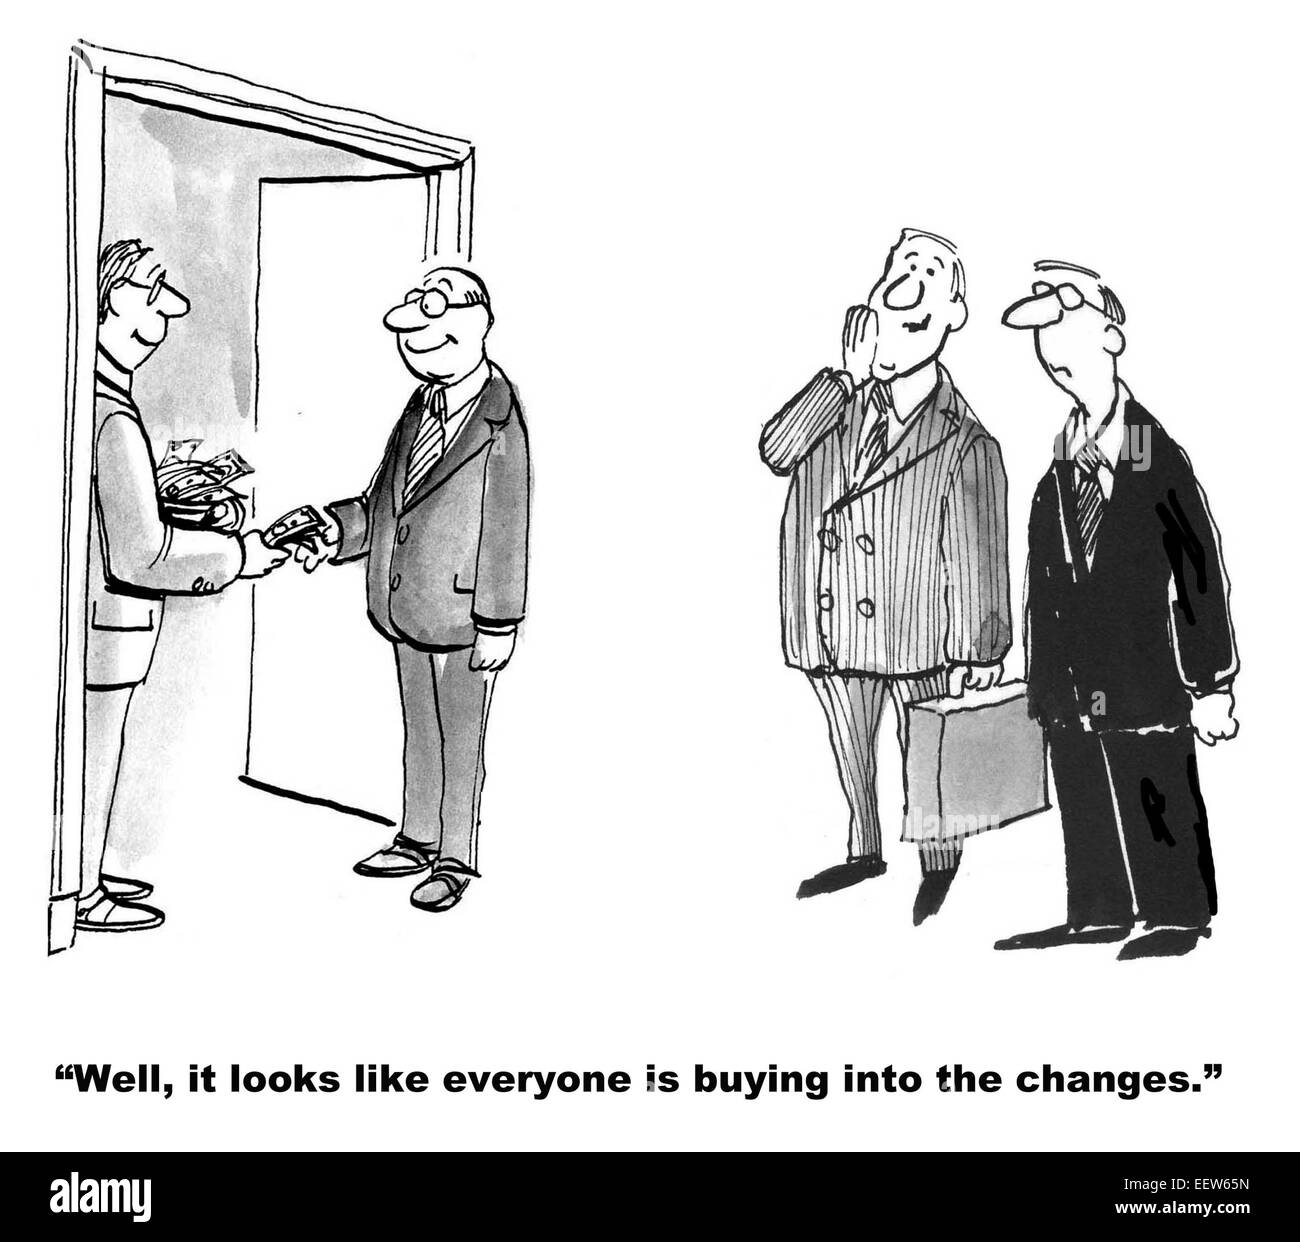 Cartoon of company literally paying money to managers to encourage change  Stock Photo - Alamy